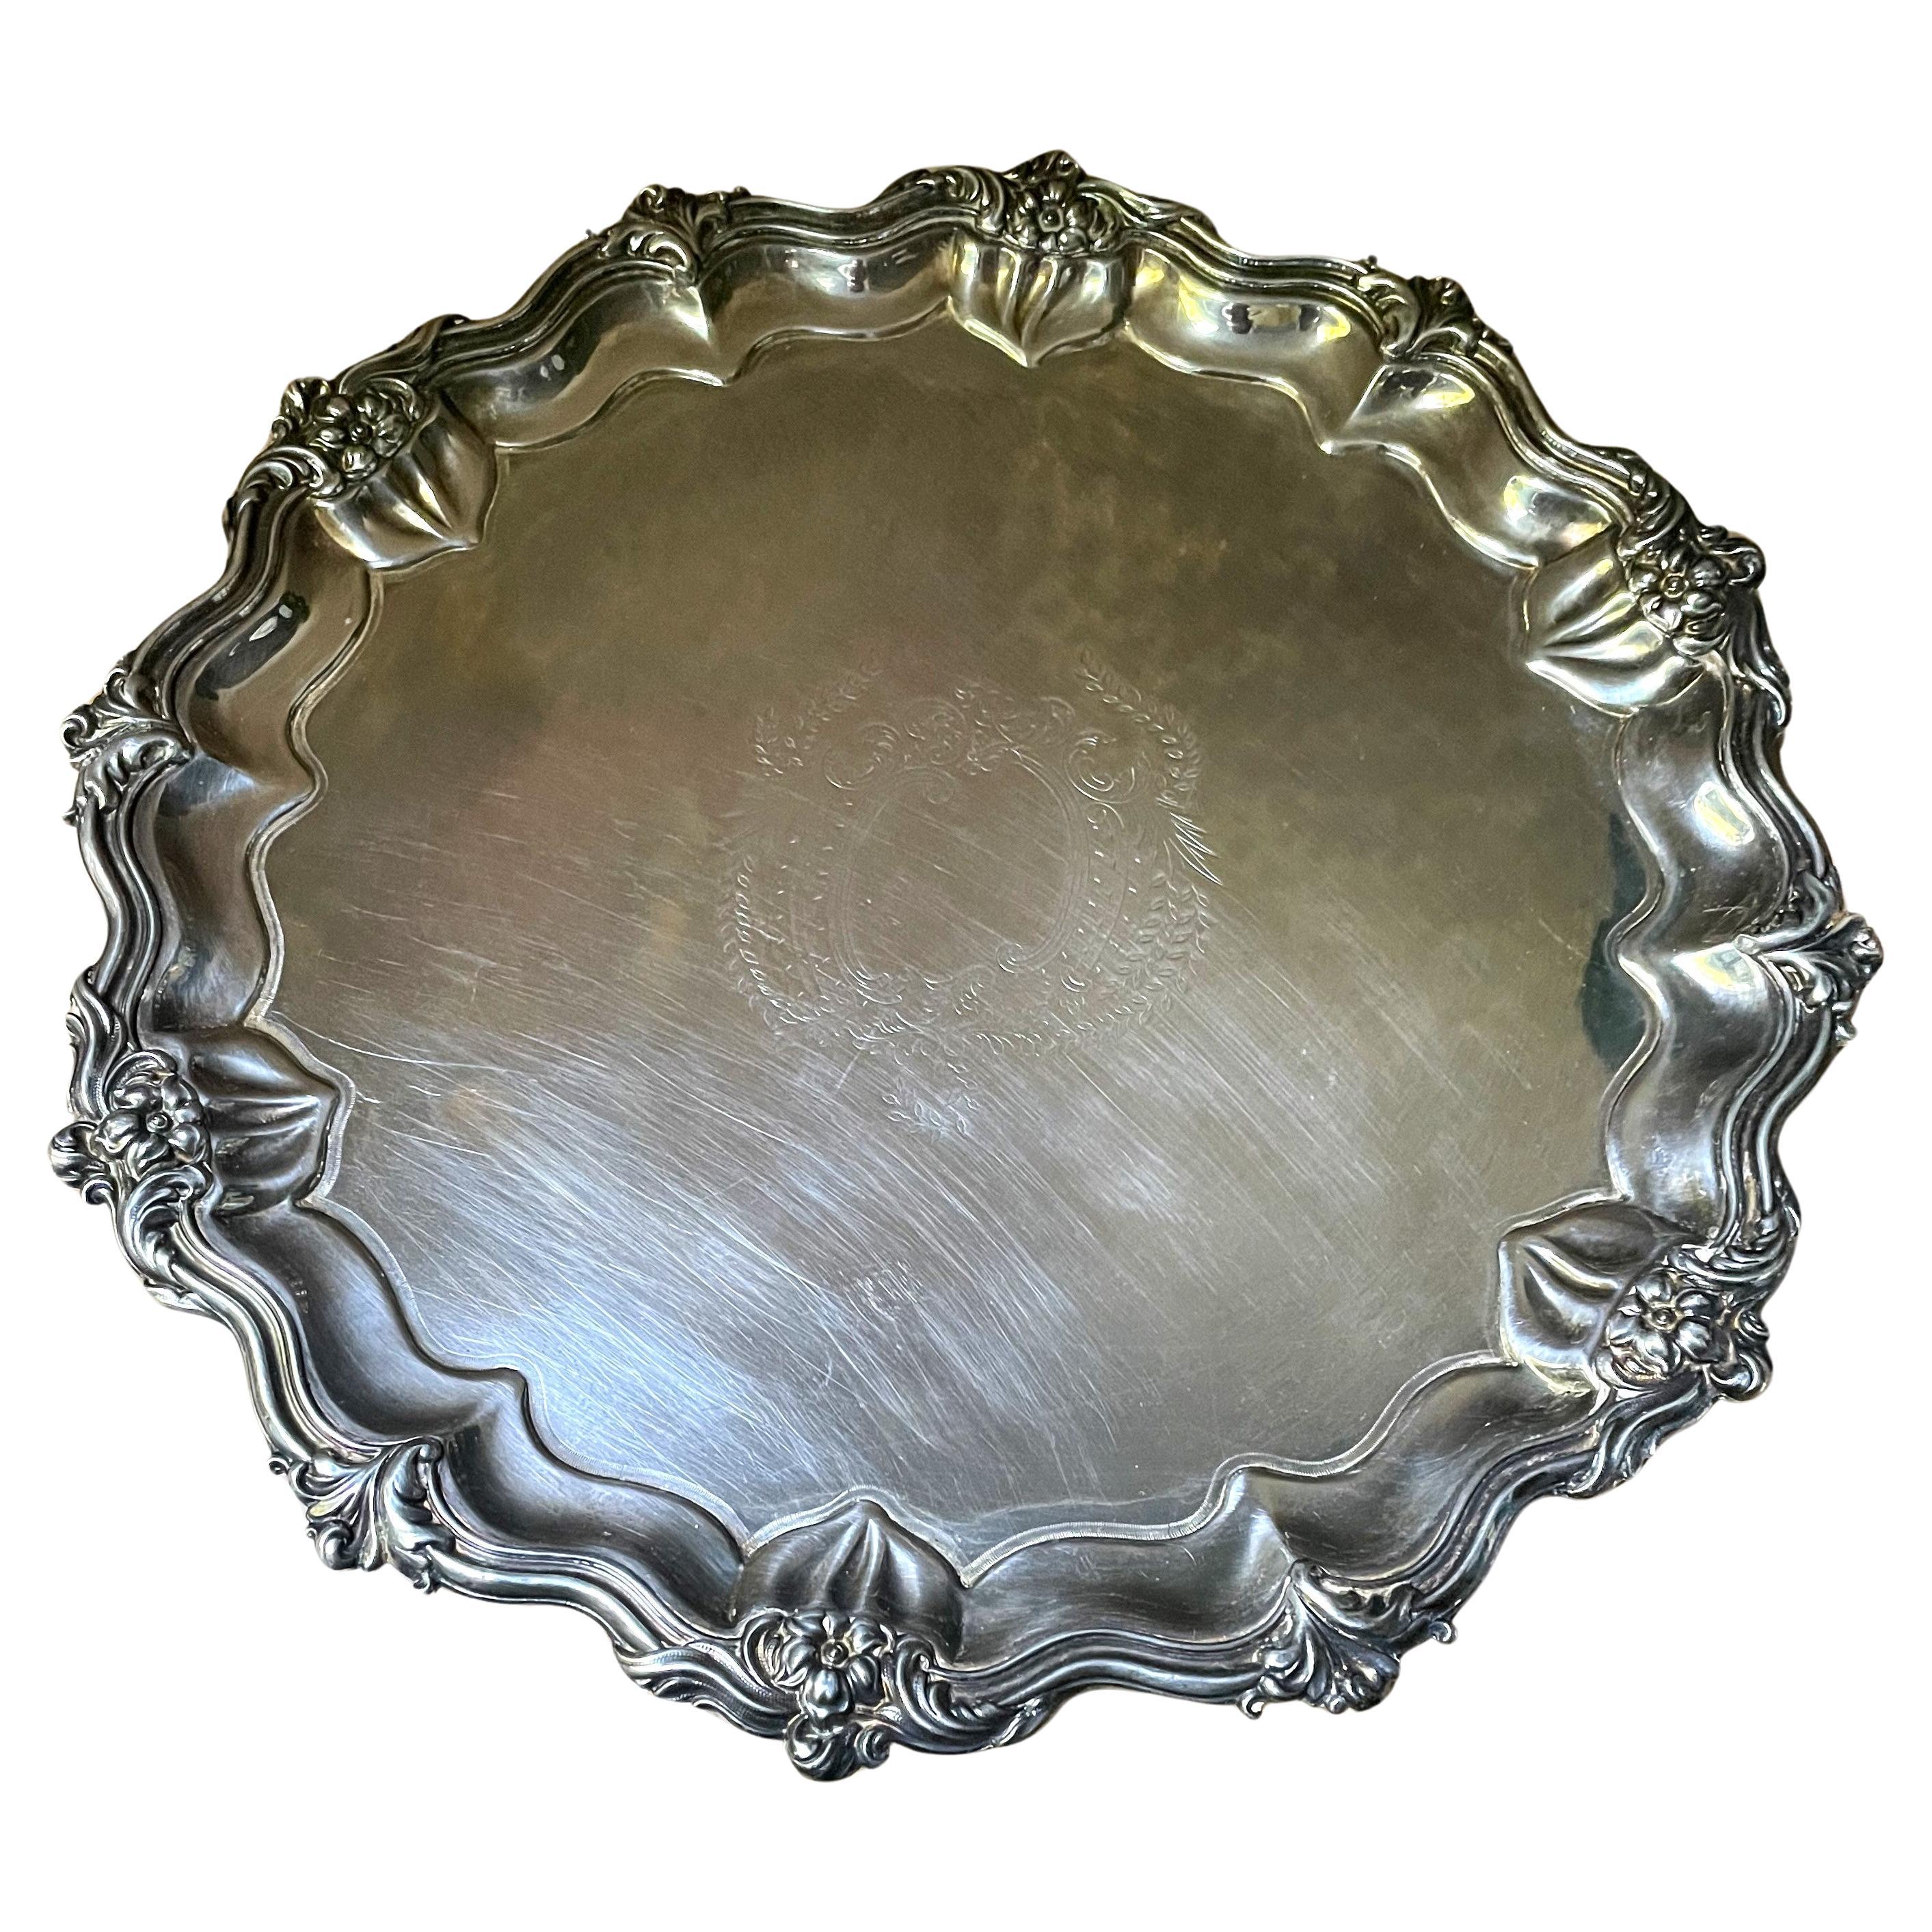 Walker & Hall 1906 Sheffield England Silverplate Salver Footed Tray Plateau  For Sale